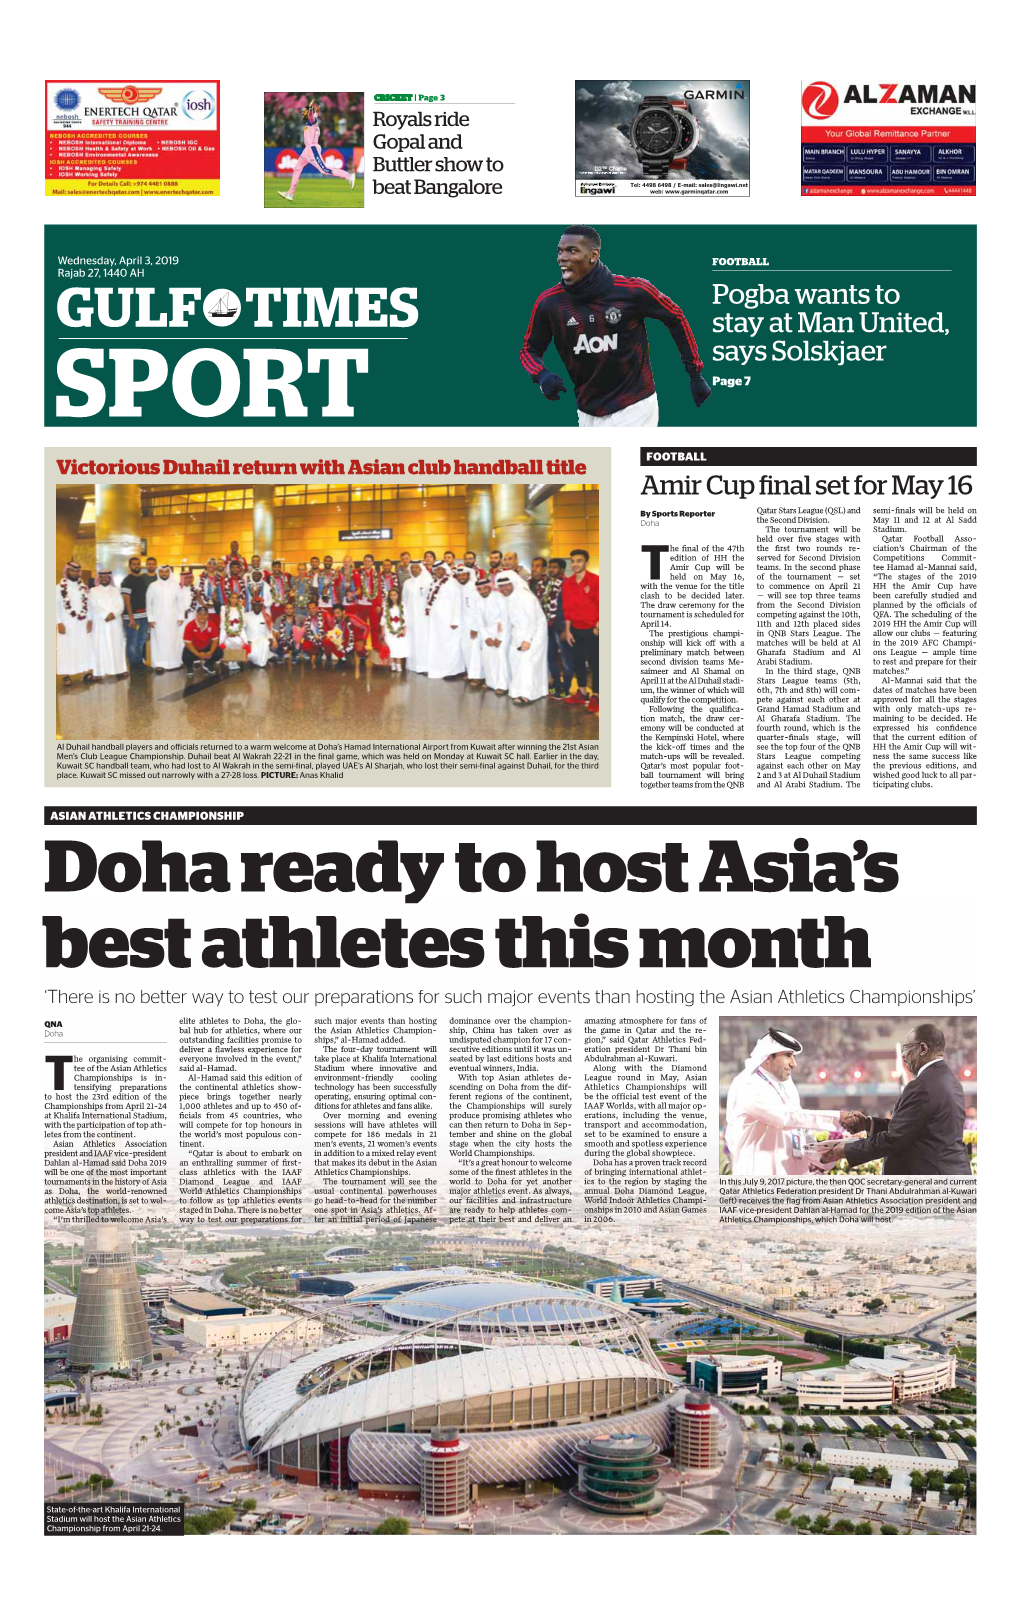 Doha Ready to Host Asia's Best Athletes This Month